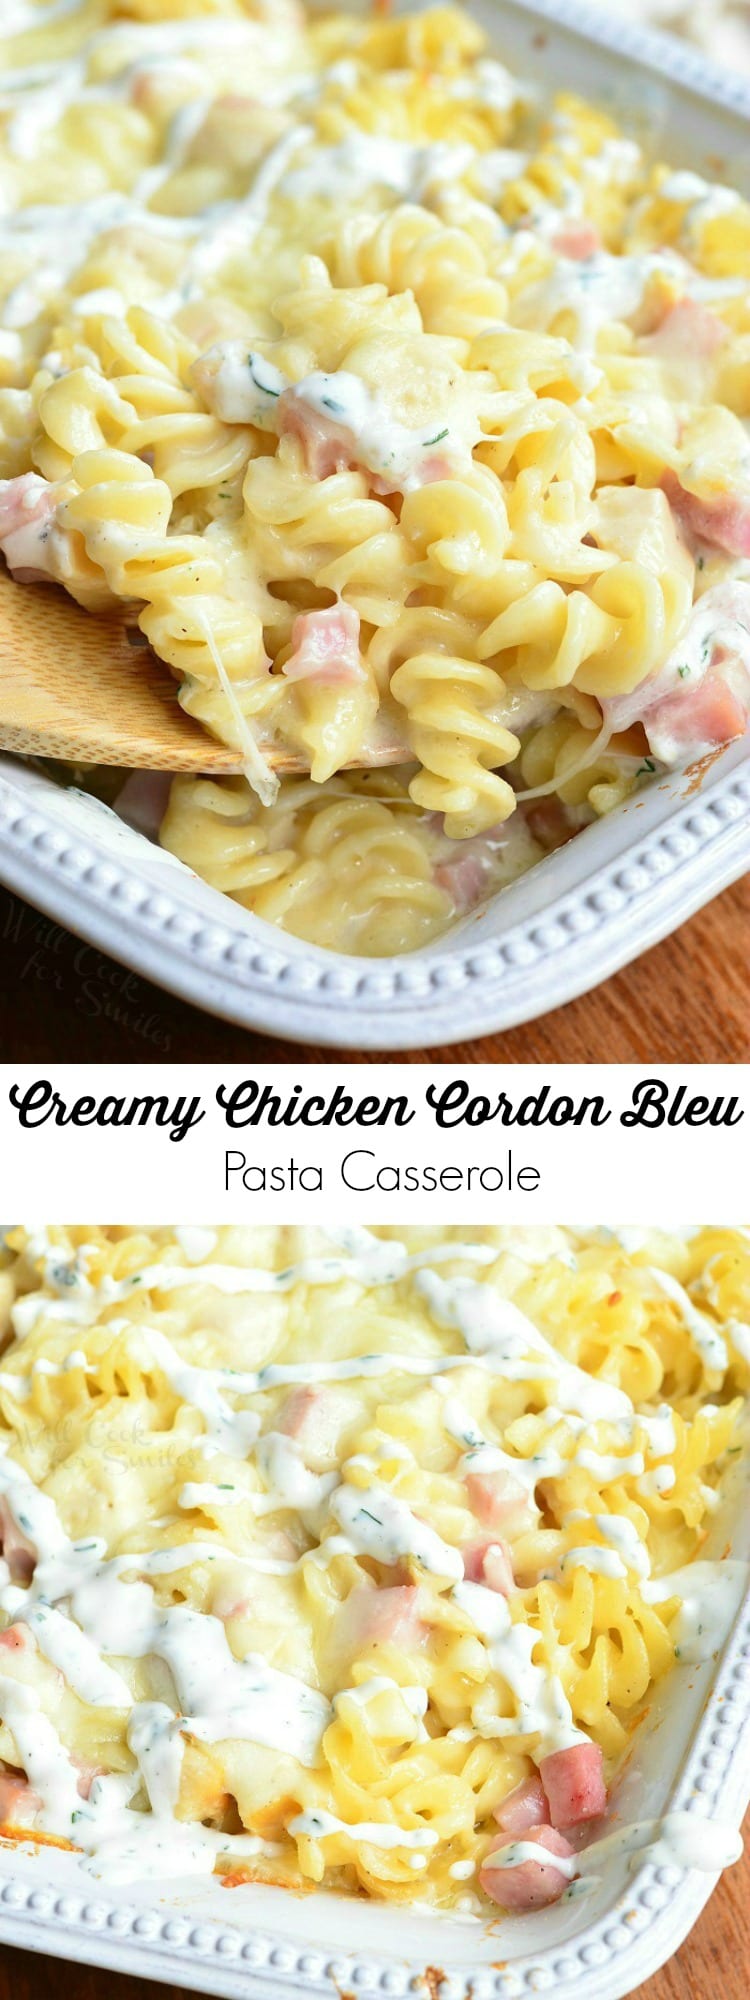 Chicken Cordon Bleu pasta with cork screw pasta and ham in a cheese sauce in a white casserole dish with a wooden spoon